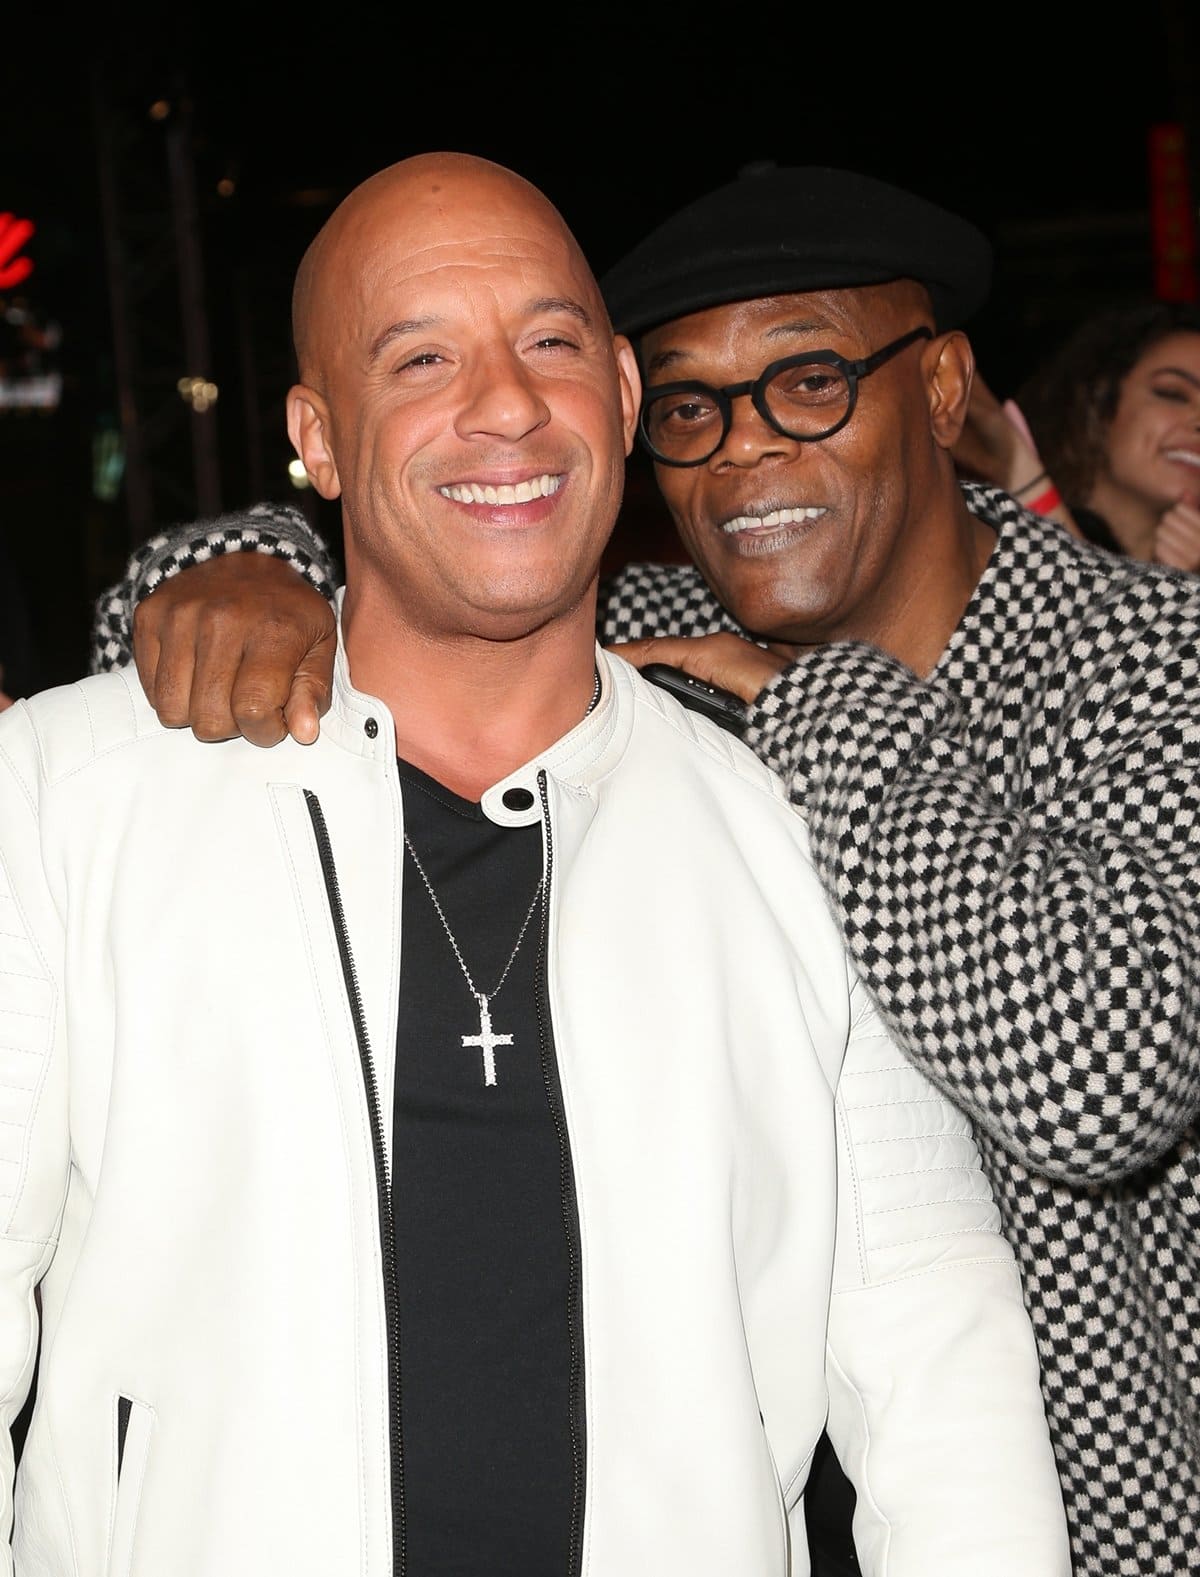 Vin Diesel and Samuel L. Jackson graced the premiere of Paramount Pictures' 'XXX: Return Of Xander Cage' held on January 19, 2017, in Los Angeles, California